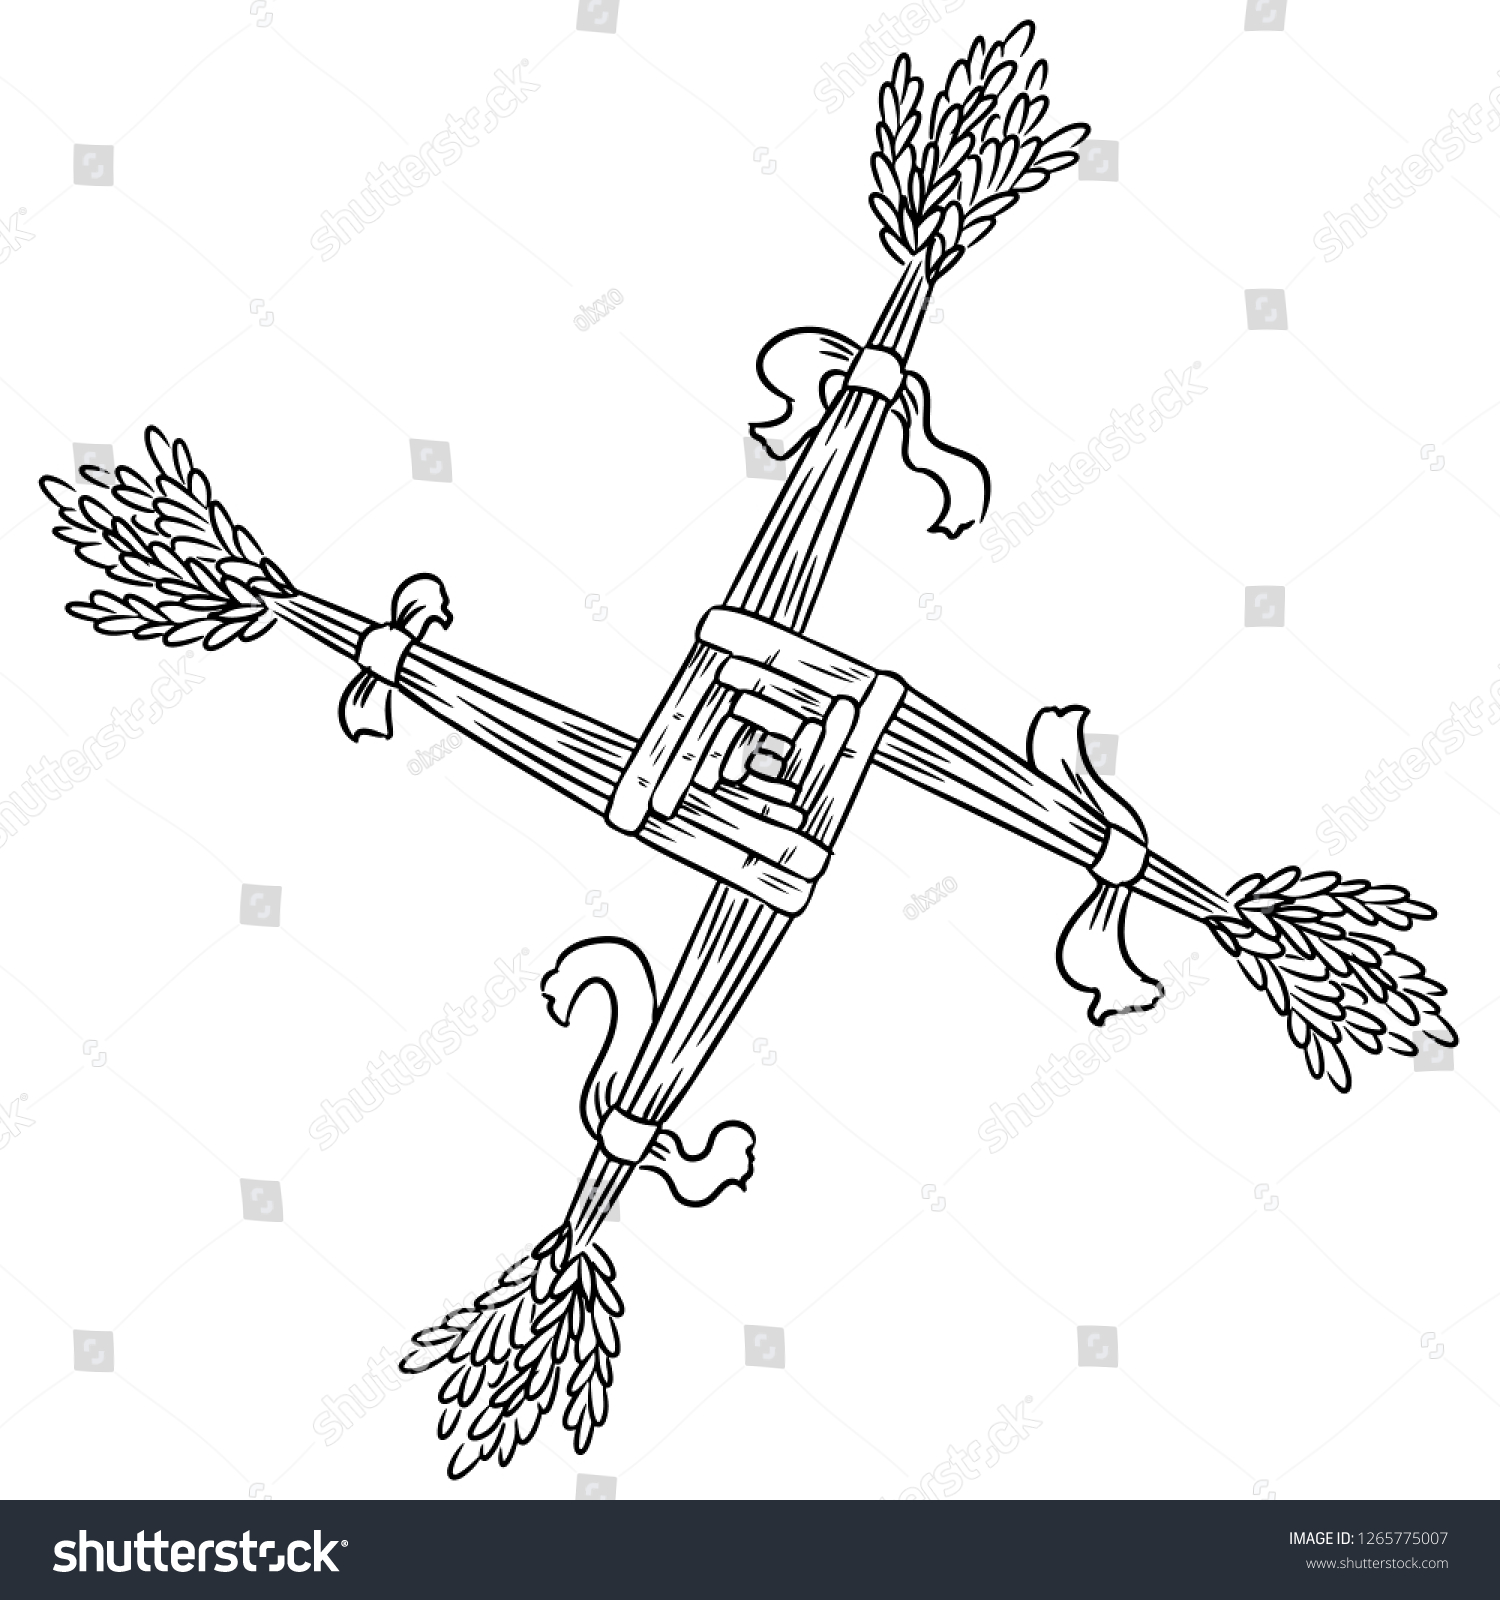 SVG of Brigid's Cross made of straw. Wiccan pagan sketched symbol. Isolated element svg